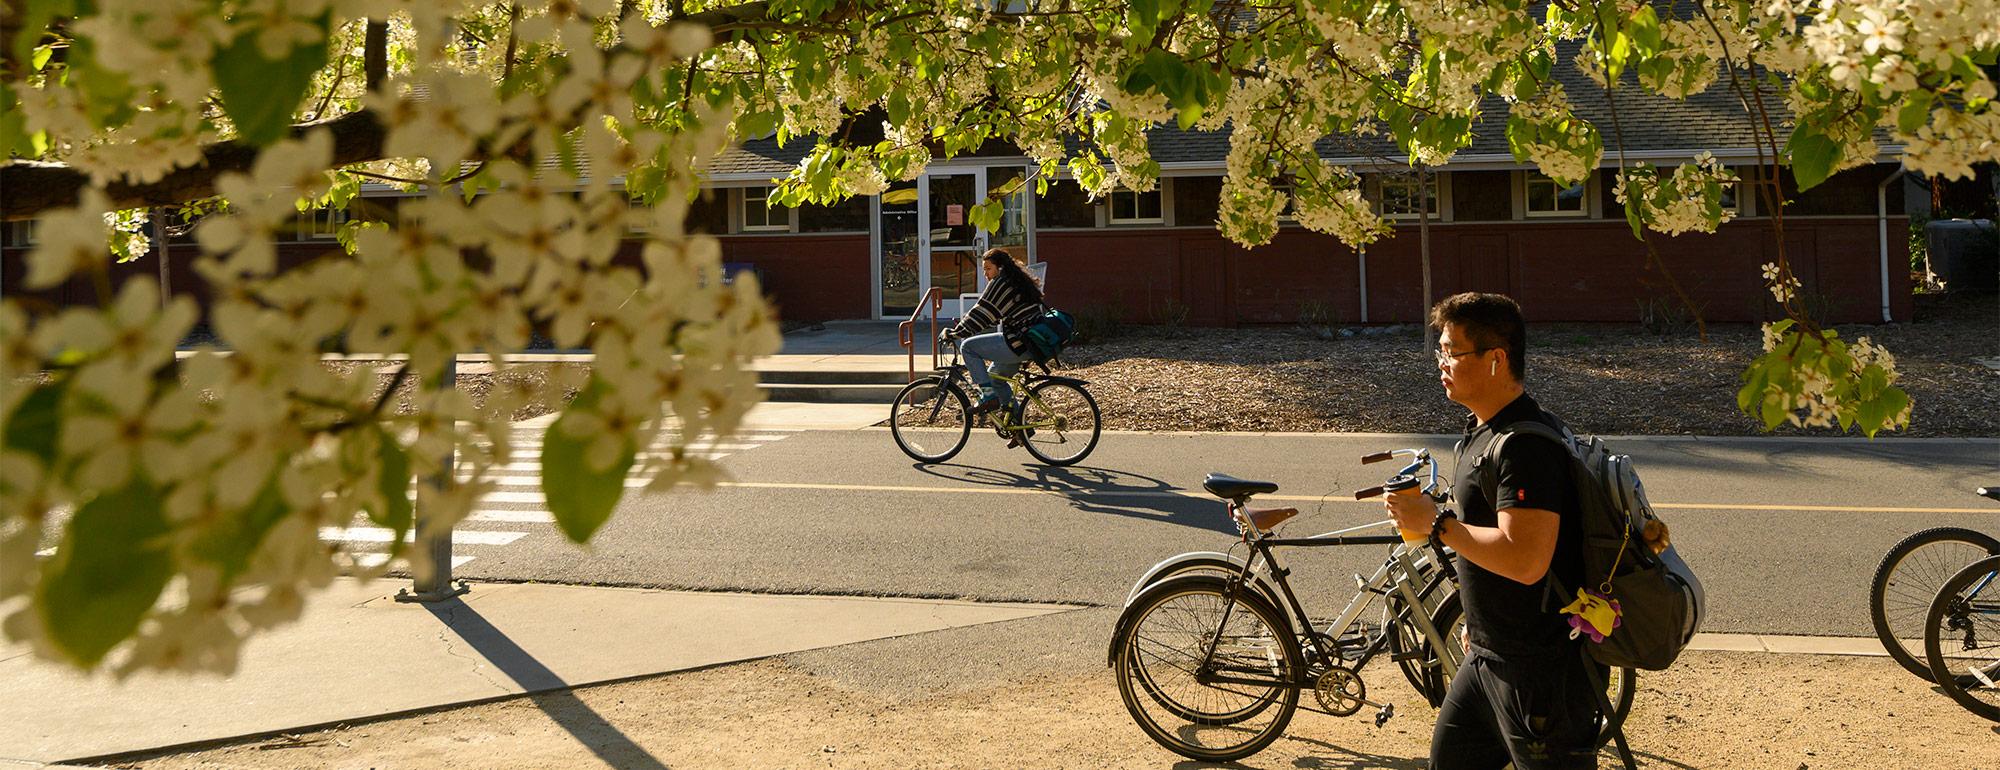 a student walking on campus near some flowering trees and a person on a bike in the background